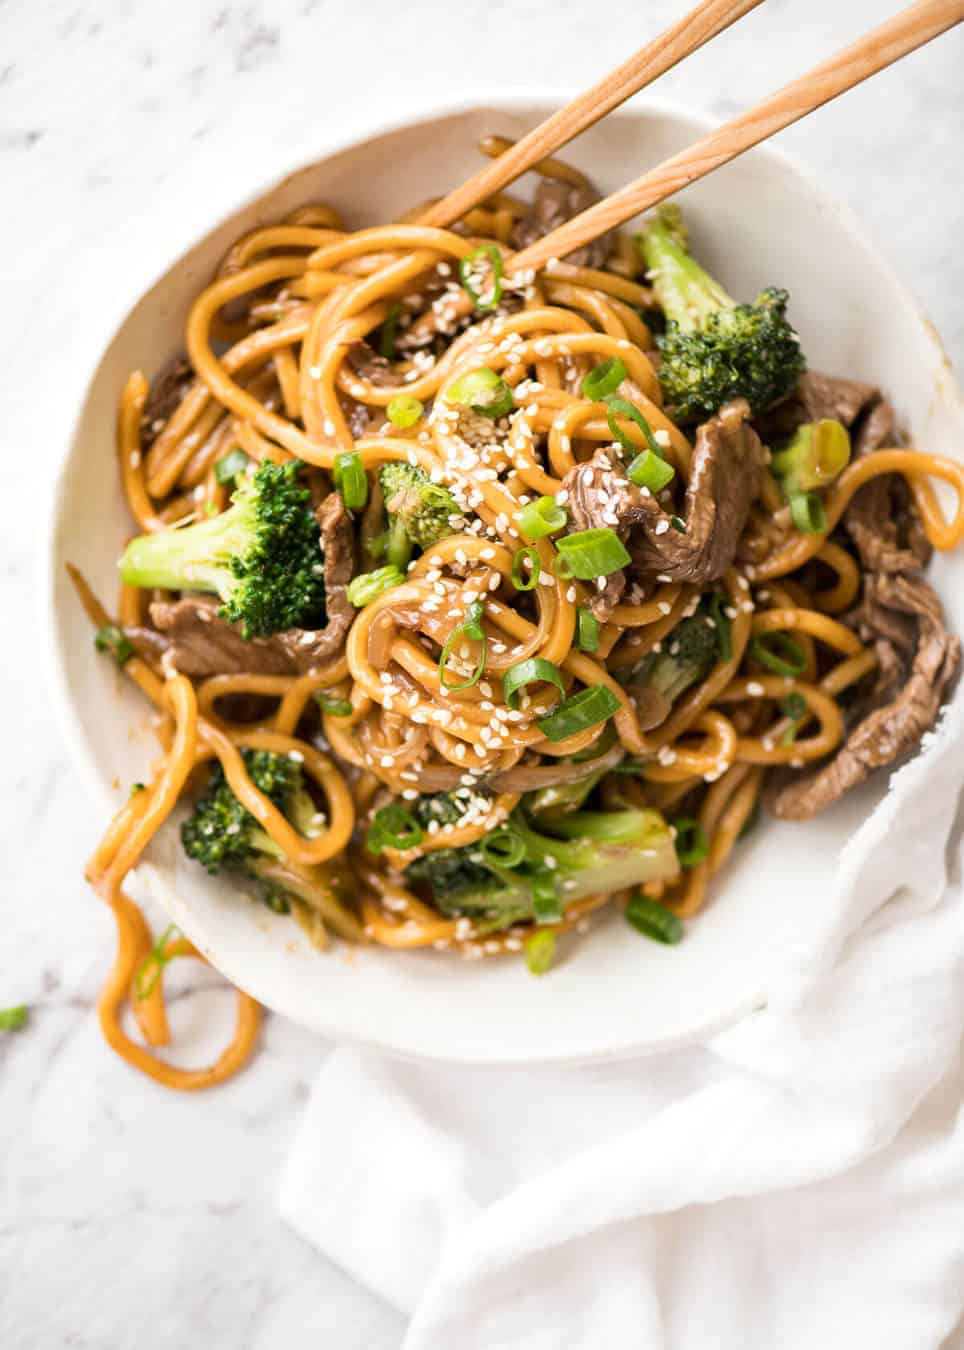 Chinese Beef and Broccoli Noodles - Everybody's favourite Chinese Beef and Broccoli with noodles! recipetineats.com